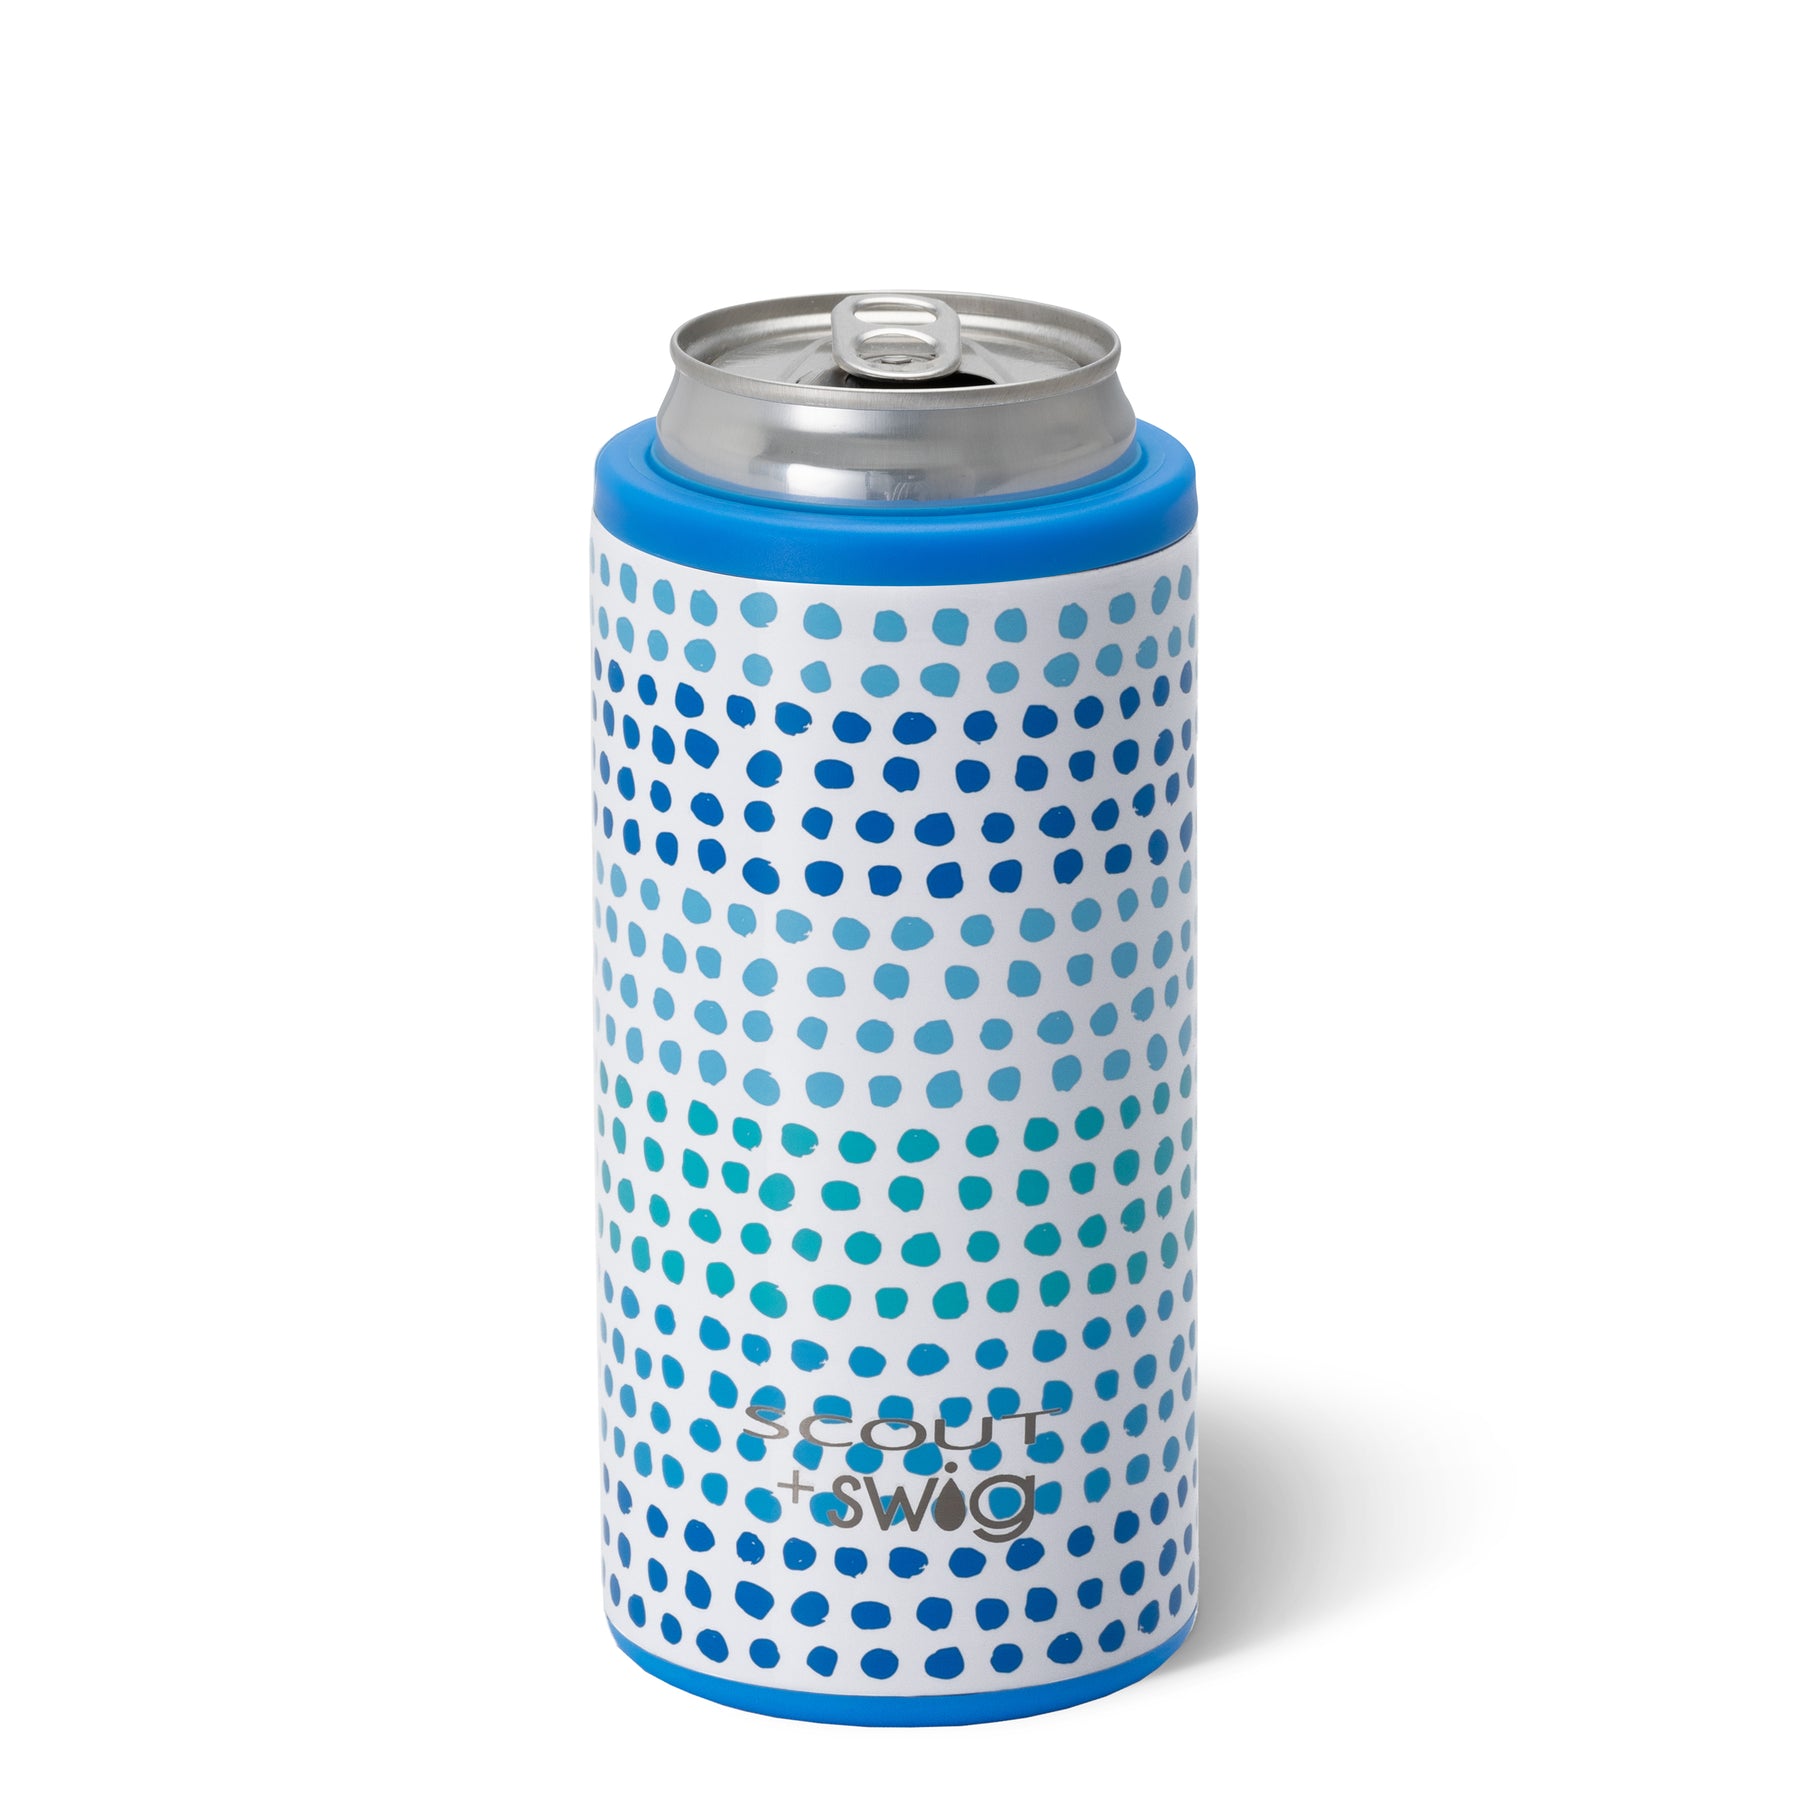 Swig 12oz Skinny Can Cooler – The Southernist